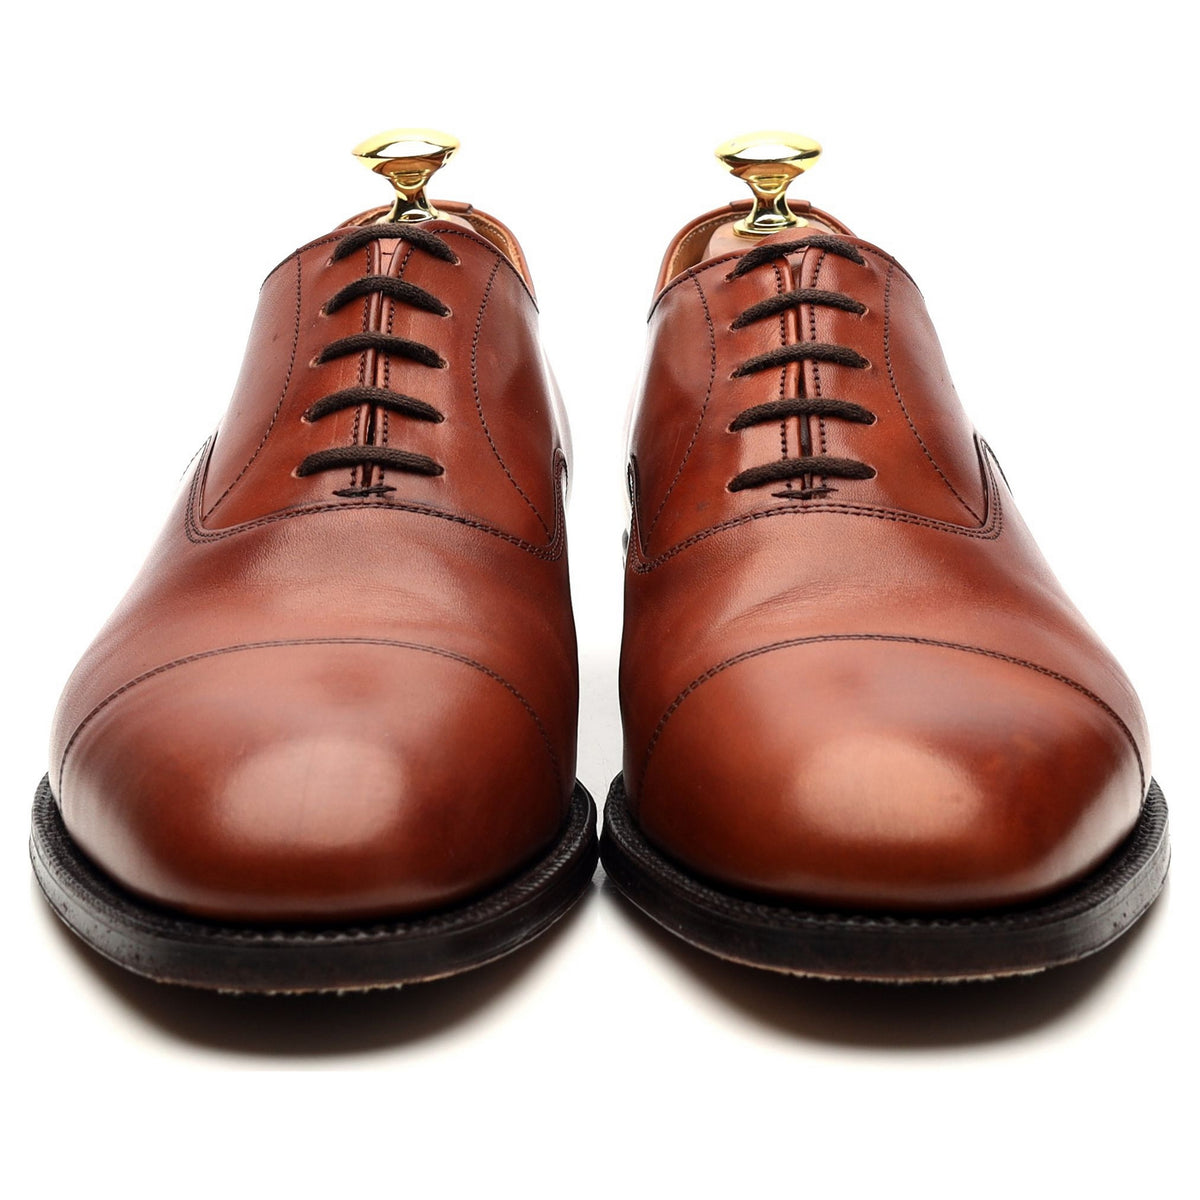 &#39;Canberra&#39; Tan Brown Leather Oxford UK 8 F